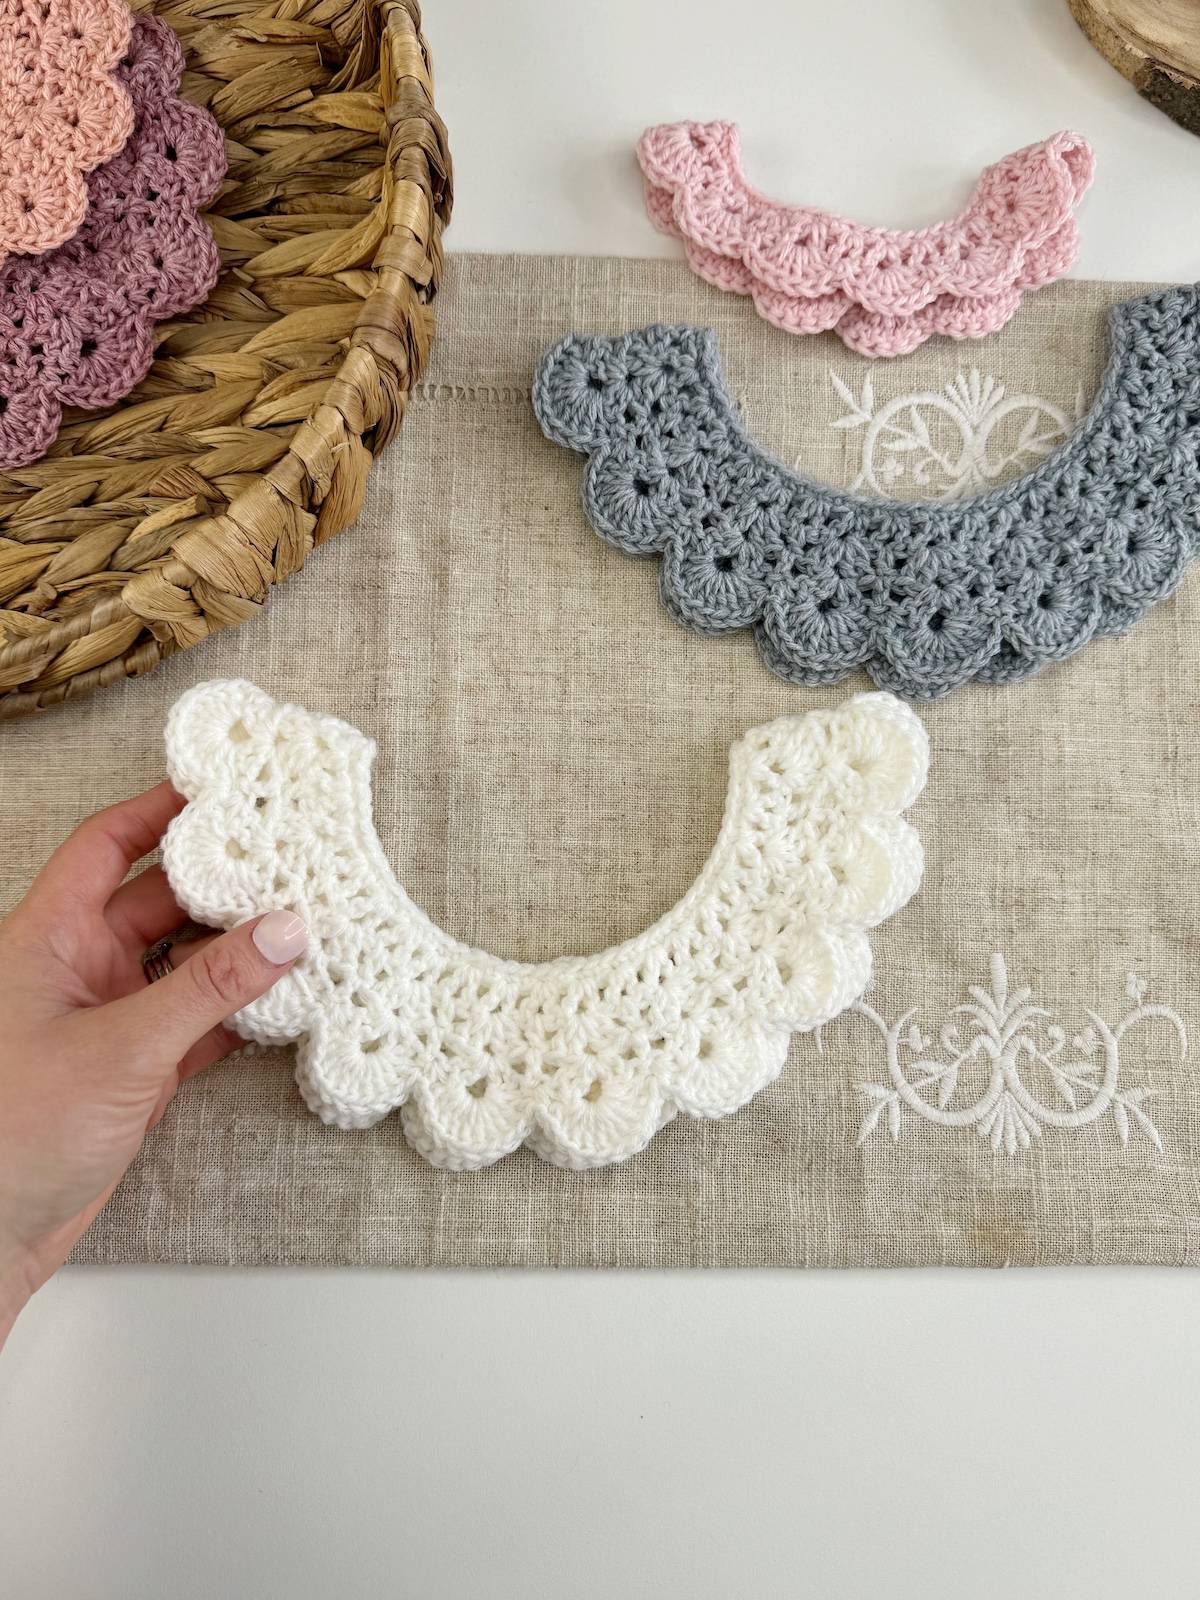 Three crocheted collars on a table.